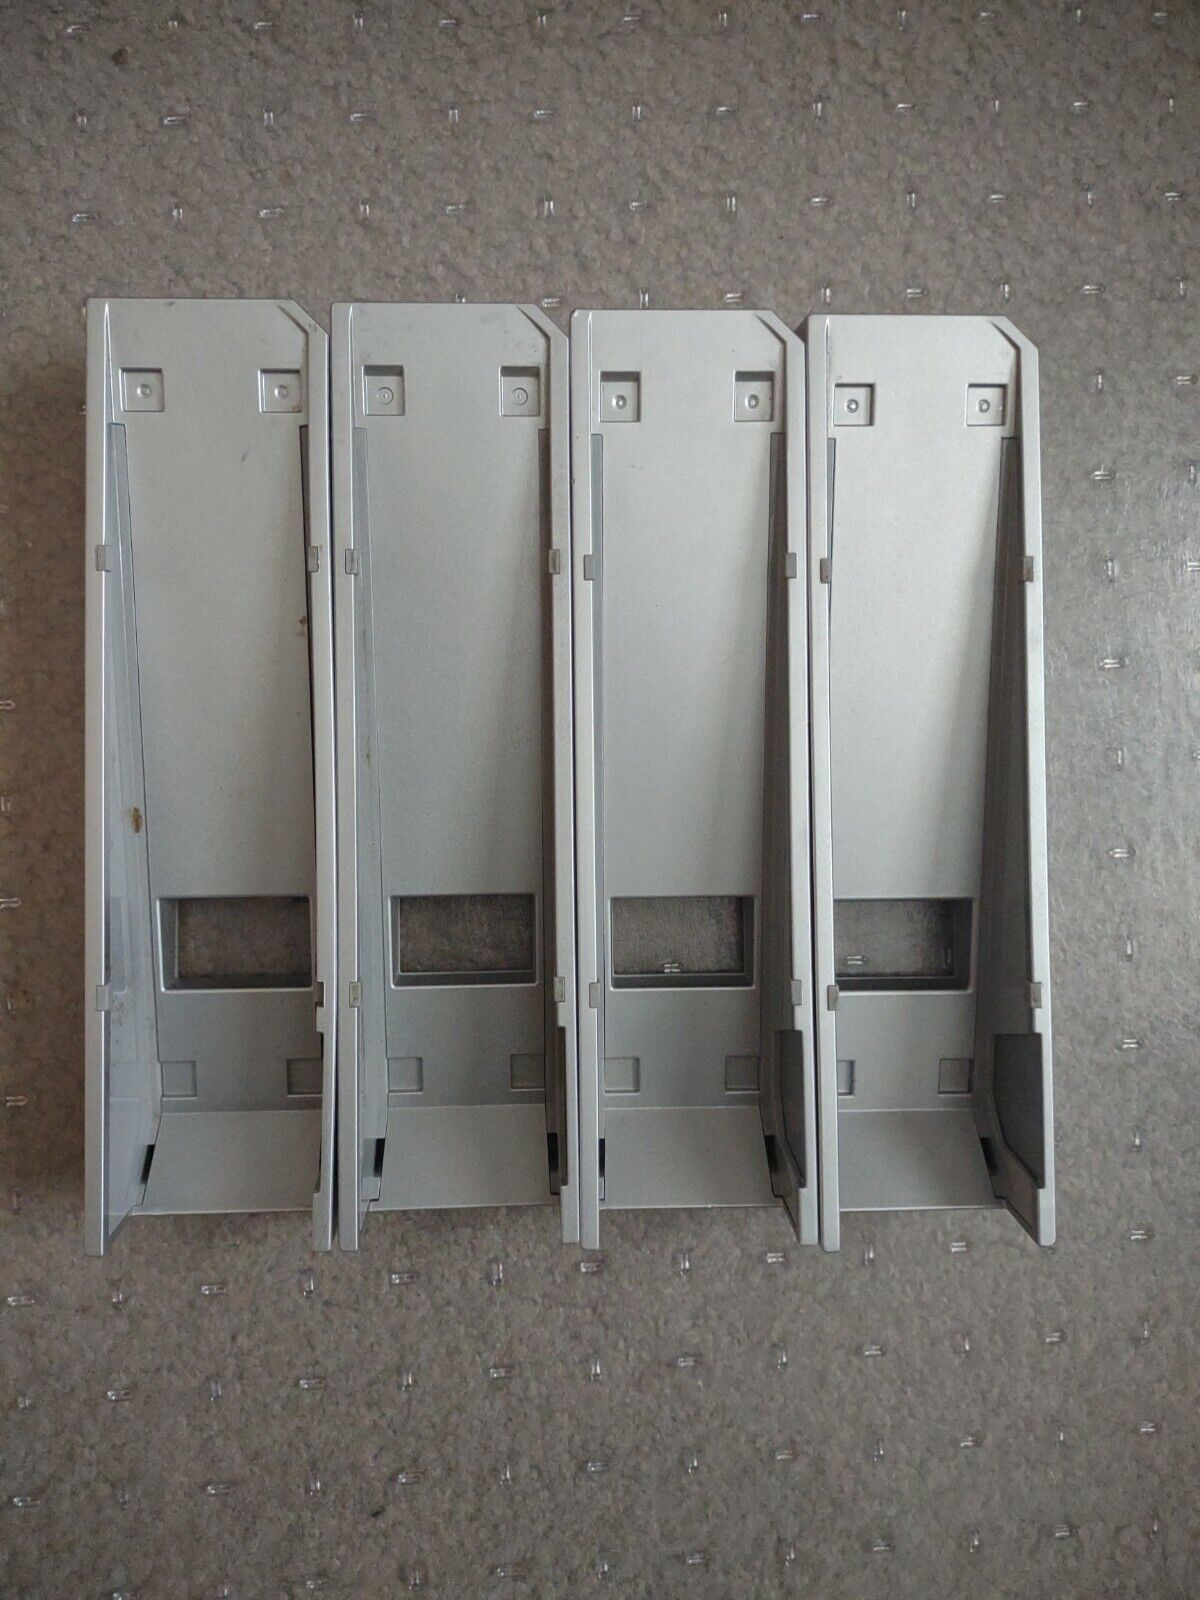 Nintendo Wii Rvl-017 console holder stand of trend rank parts 4 OEM fre lot Kansas City Mall